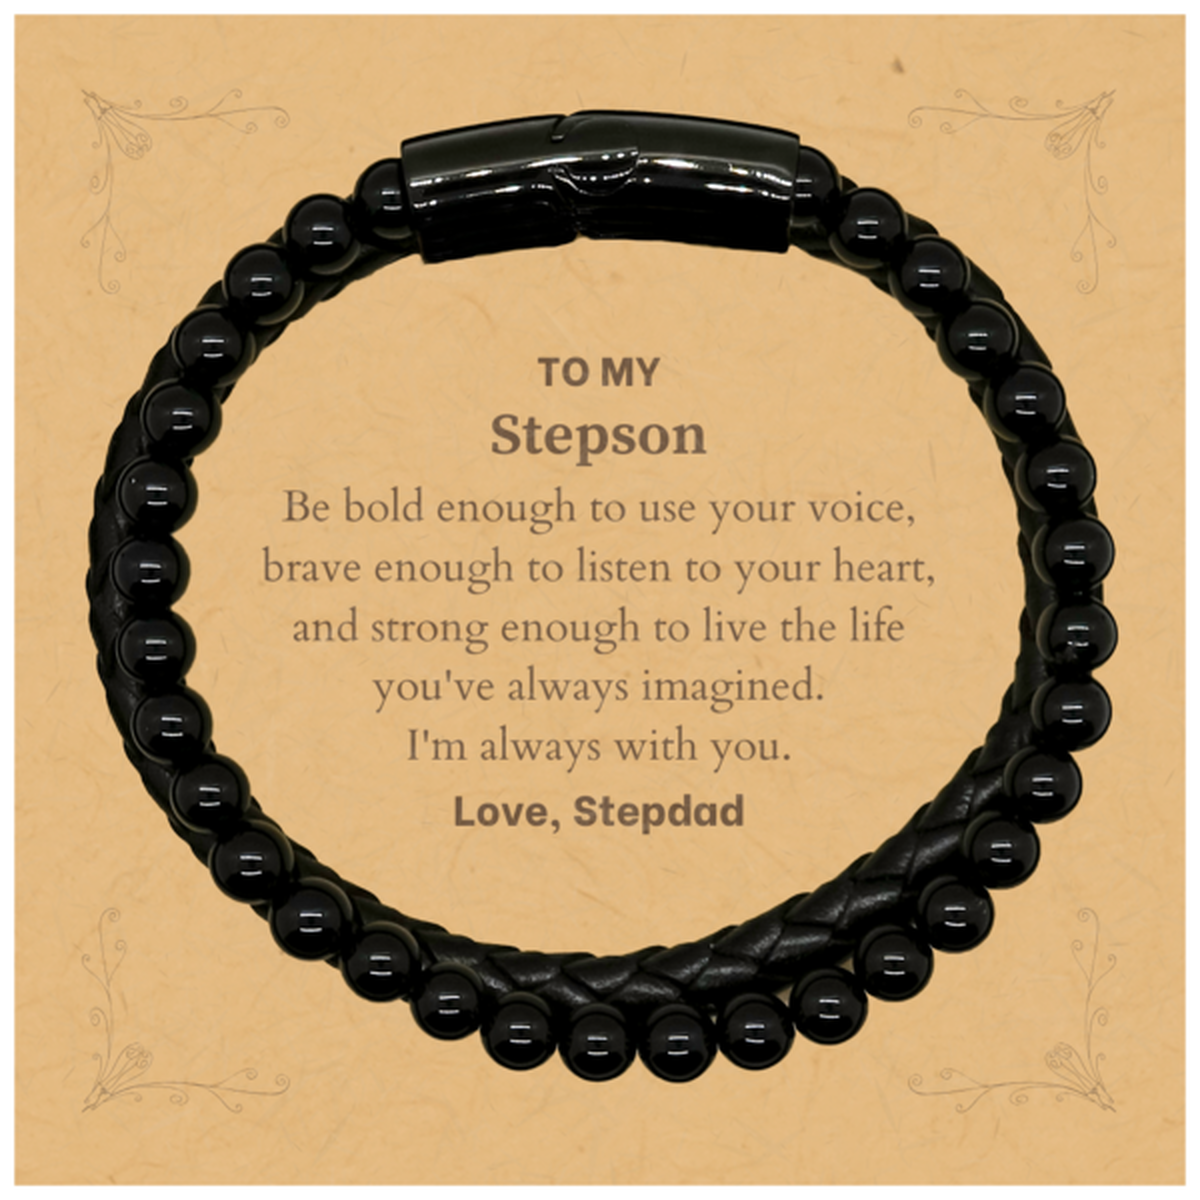 Keepsake Stepson Stone Leather Bracelets Gift Idea Graduation Christmas Birthday Stepson from Stepdad, Stepson Be bold enough to use your voice, brave enough to listen to your heart. Love, Stepdad